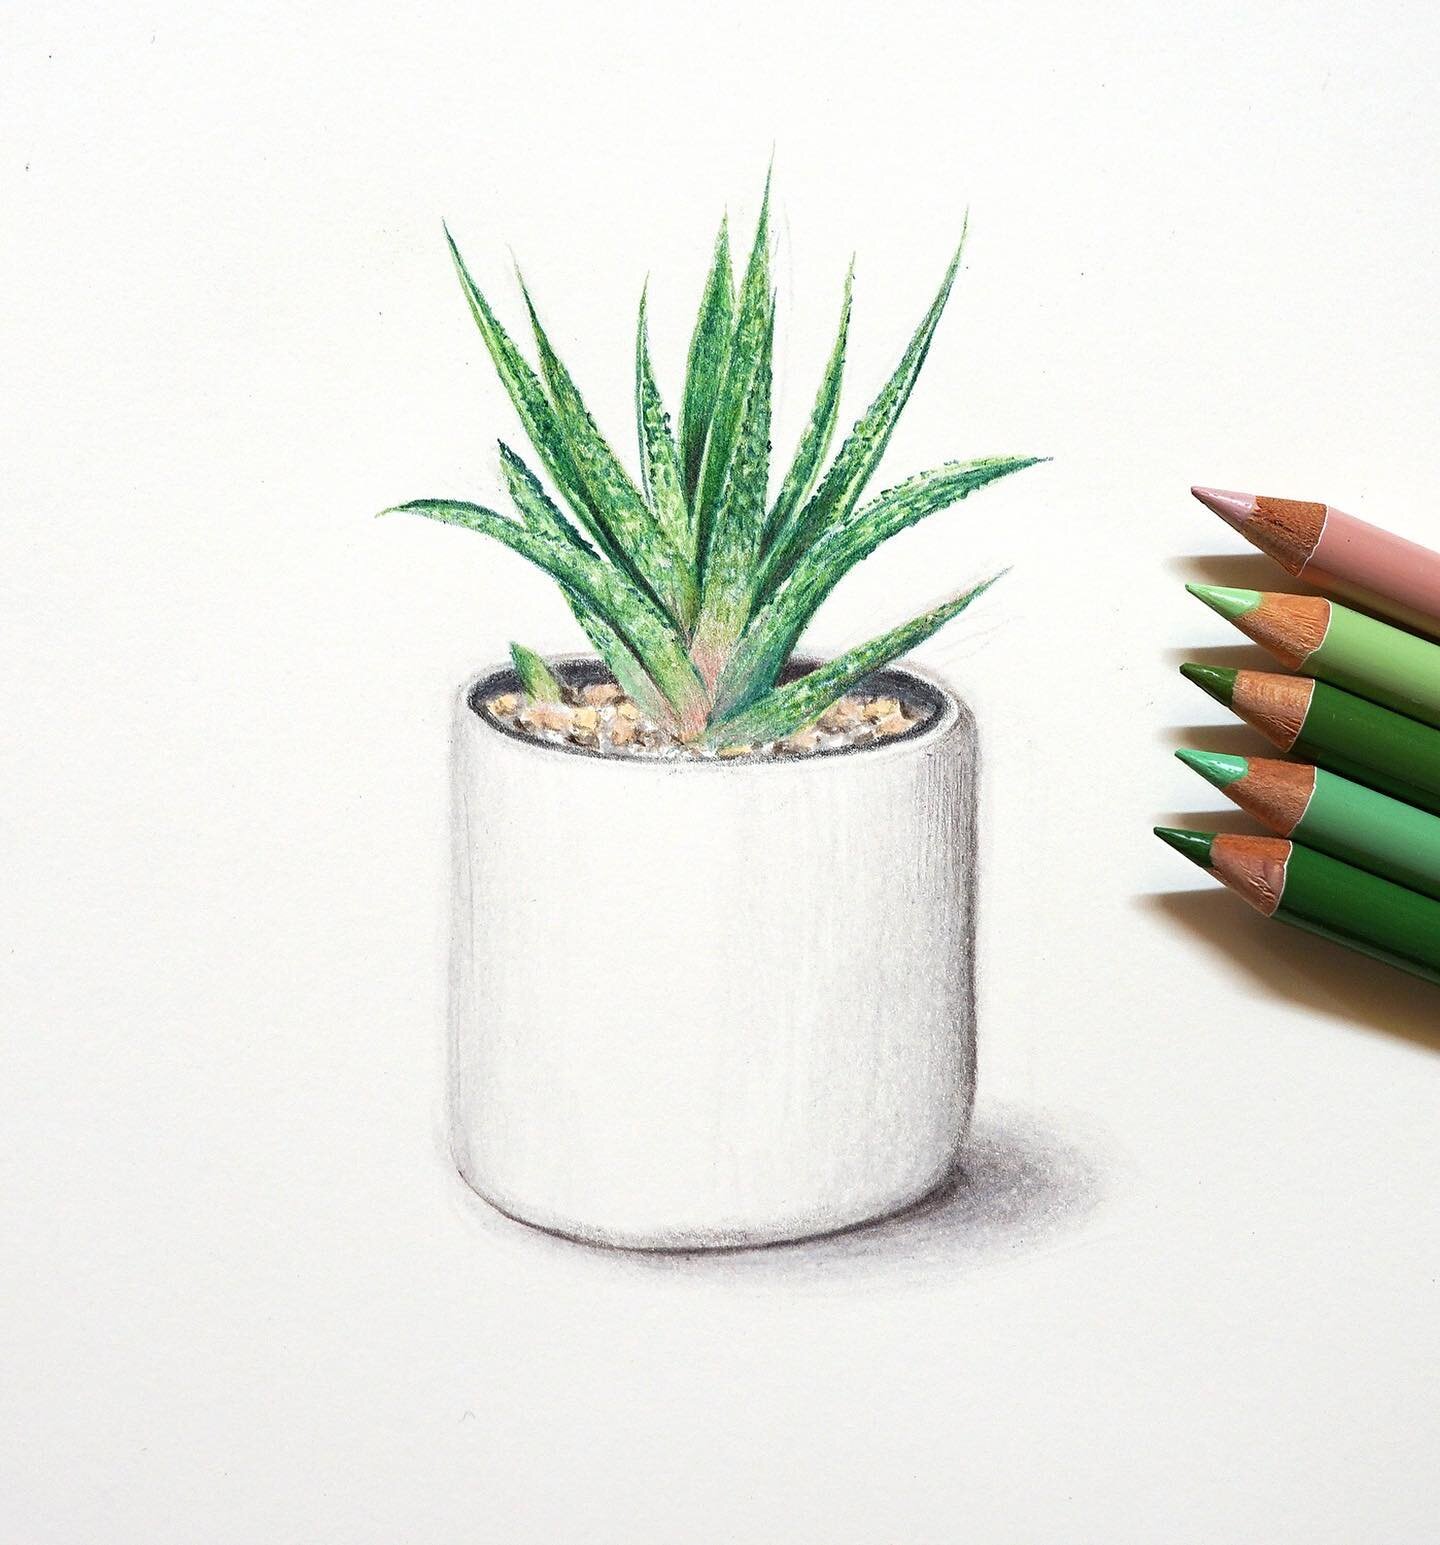 I&rsquo;ve been adding a few Holbein pencils to my (excessive) pencil collection, but with colour names like Cactus Green how could I resist! 🤷🏻&zwj;♂️
I tested out some of the green tones on this succulent sketch today and they&rsquo;re beautiful 